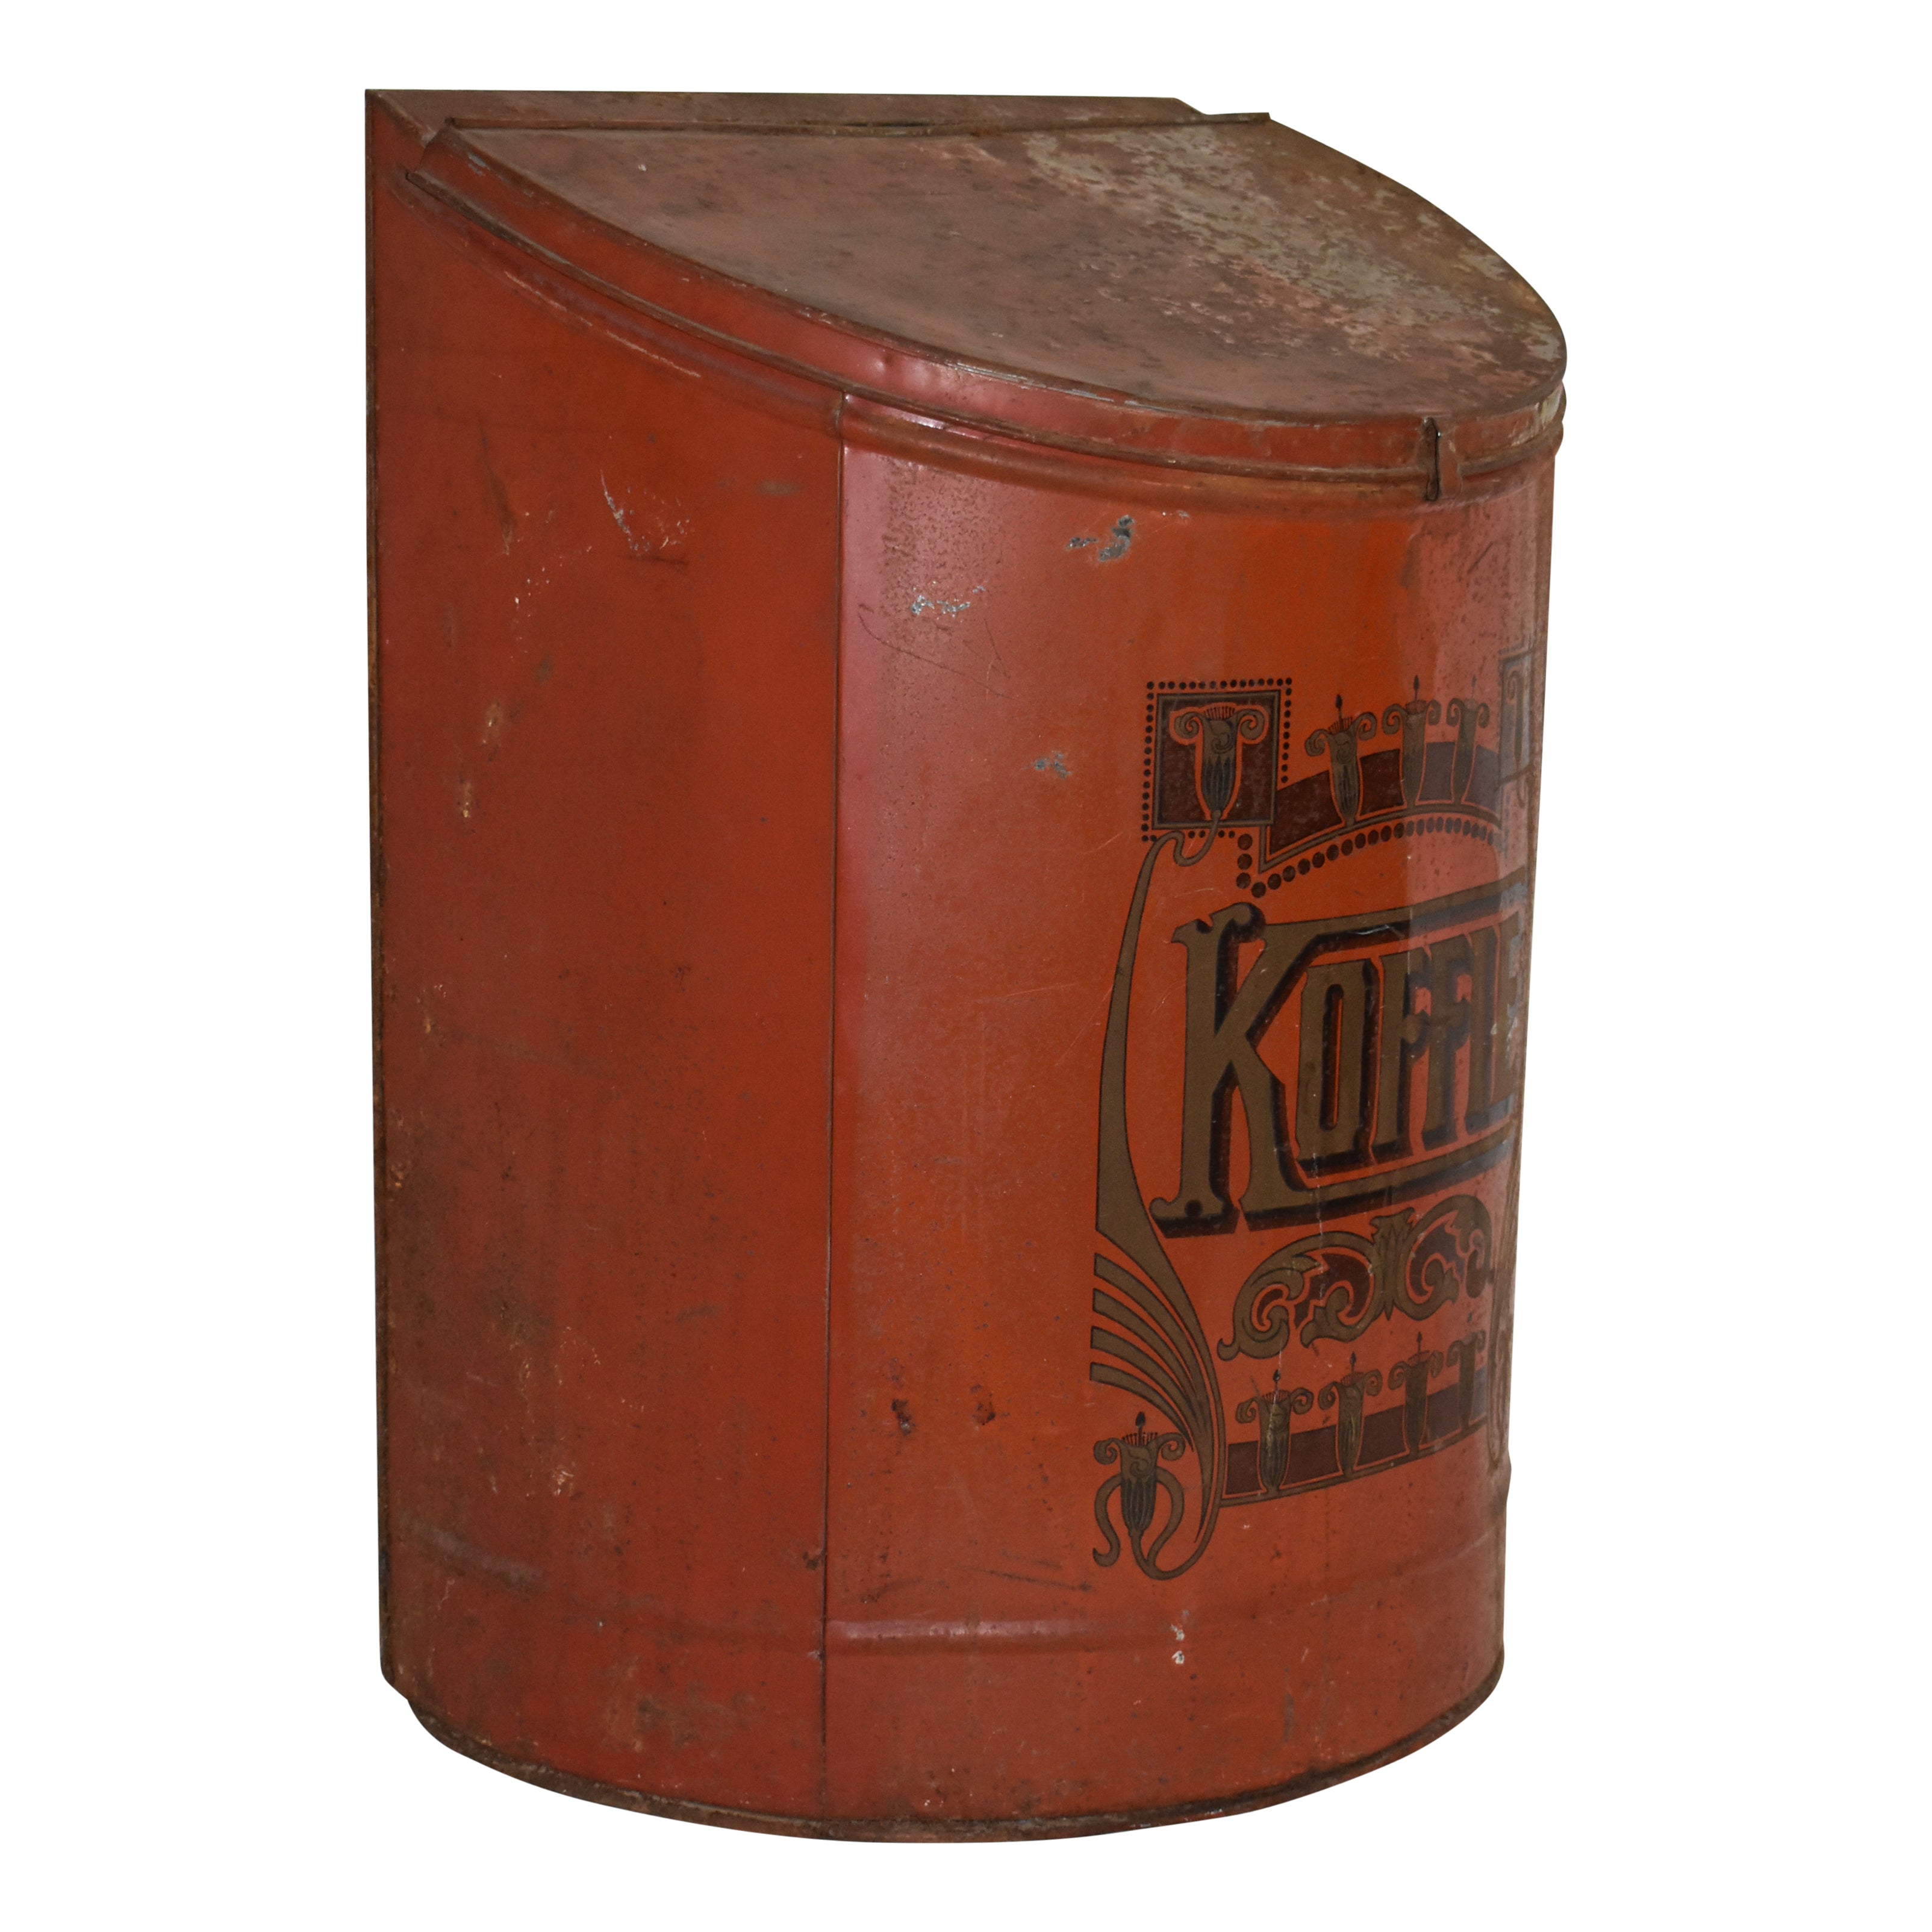 Red Koffie (Coffee) Tin